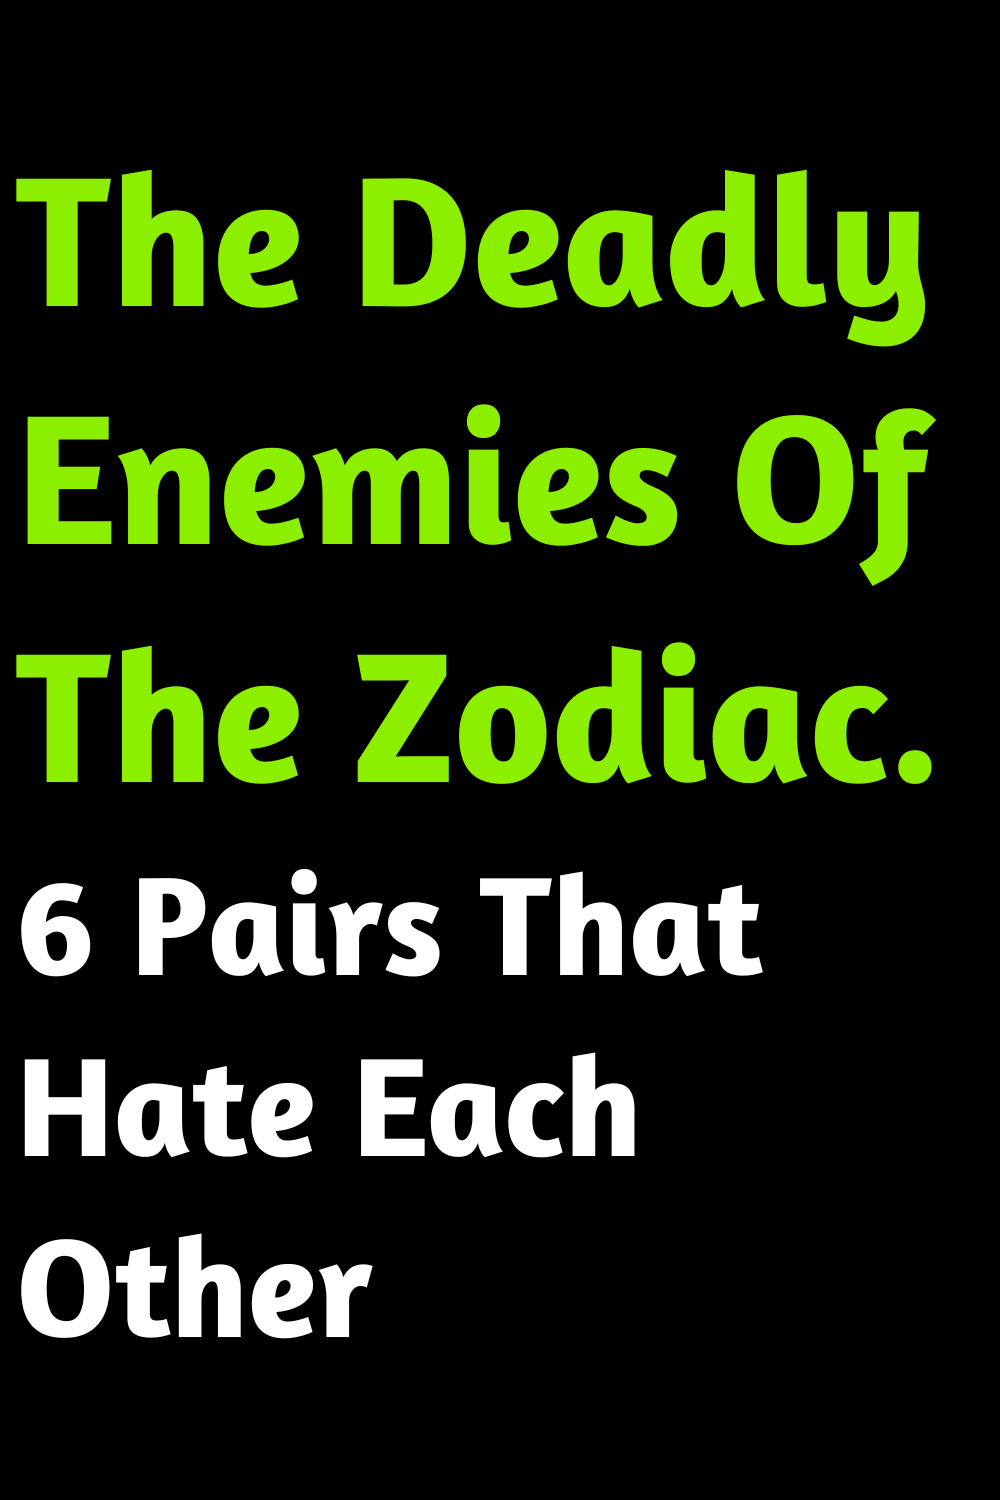 The Deadly Enemies Of The Zodiac. 6 Pairs That Hate Each Other